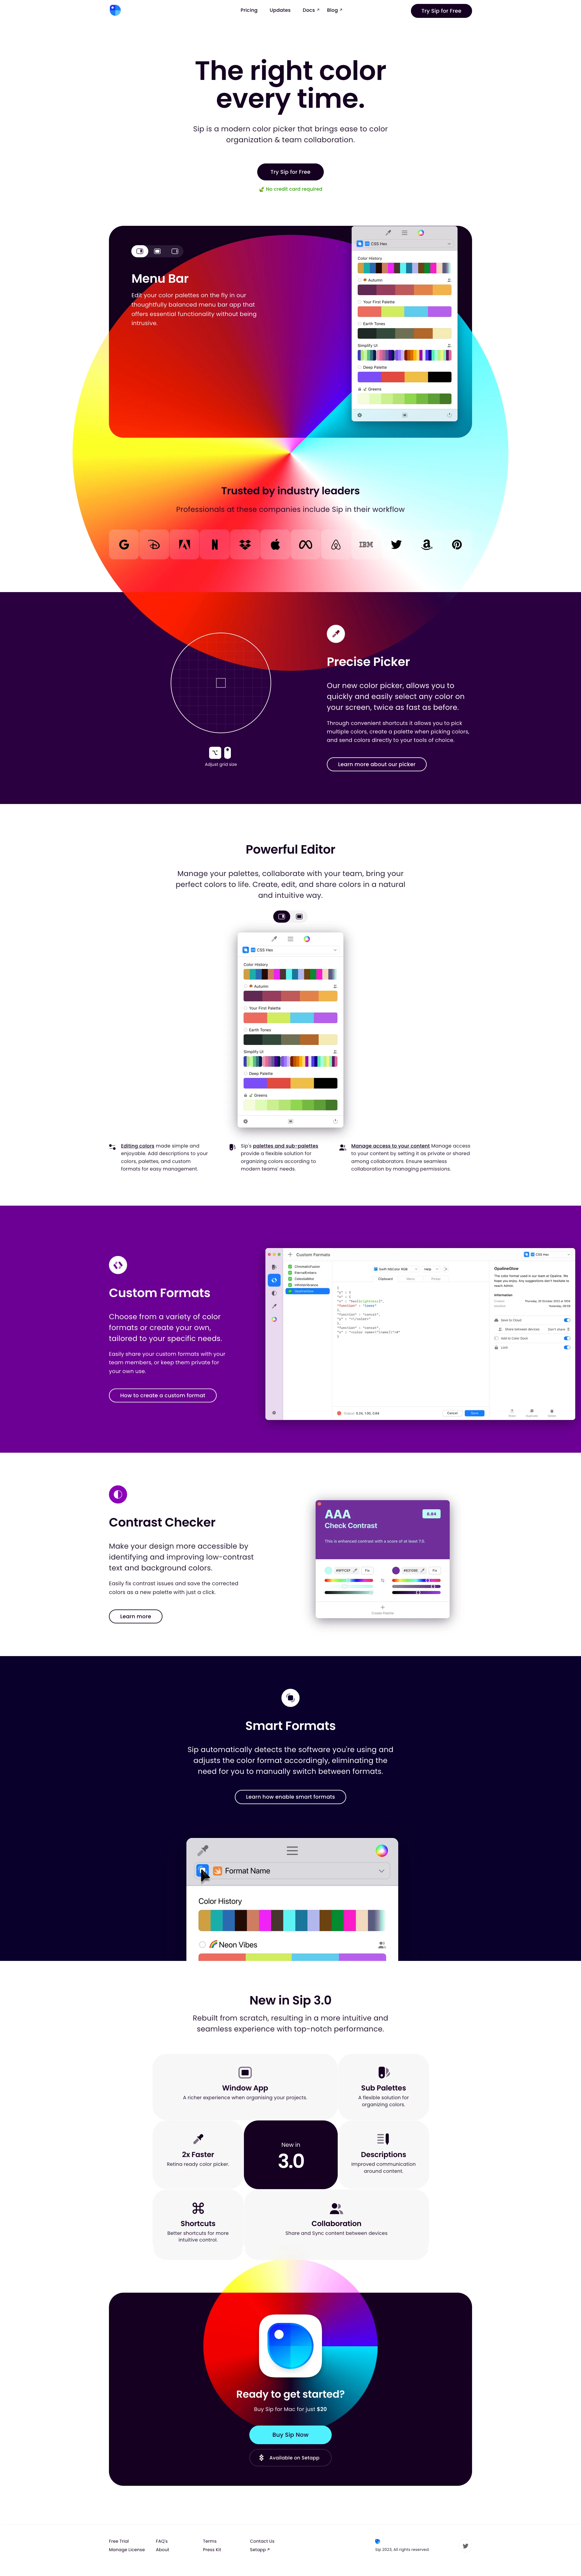 Sip Landing Page Example: Sip is a modern color picker that brings ease to color organization & team collaboration. Edit your color palettes on the fly in our thoughtfully balanced menu bar app that offers essential functionality without being intrusive.